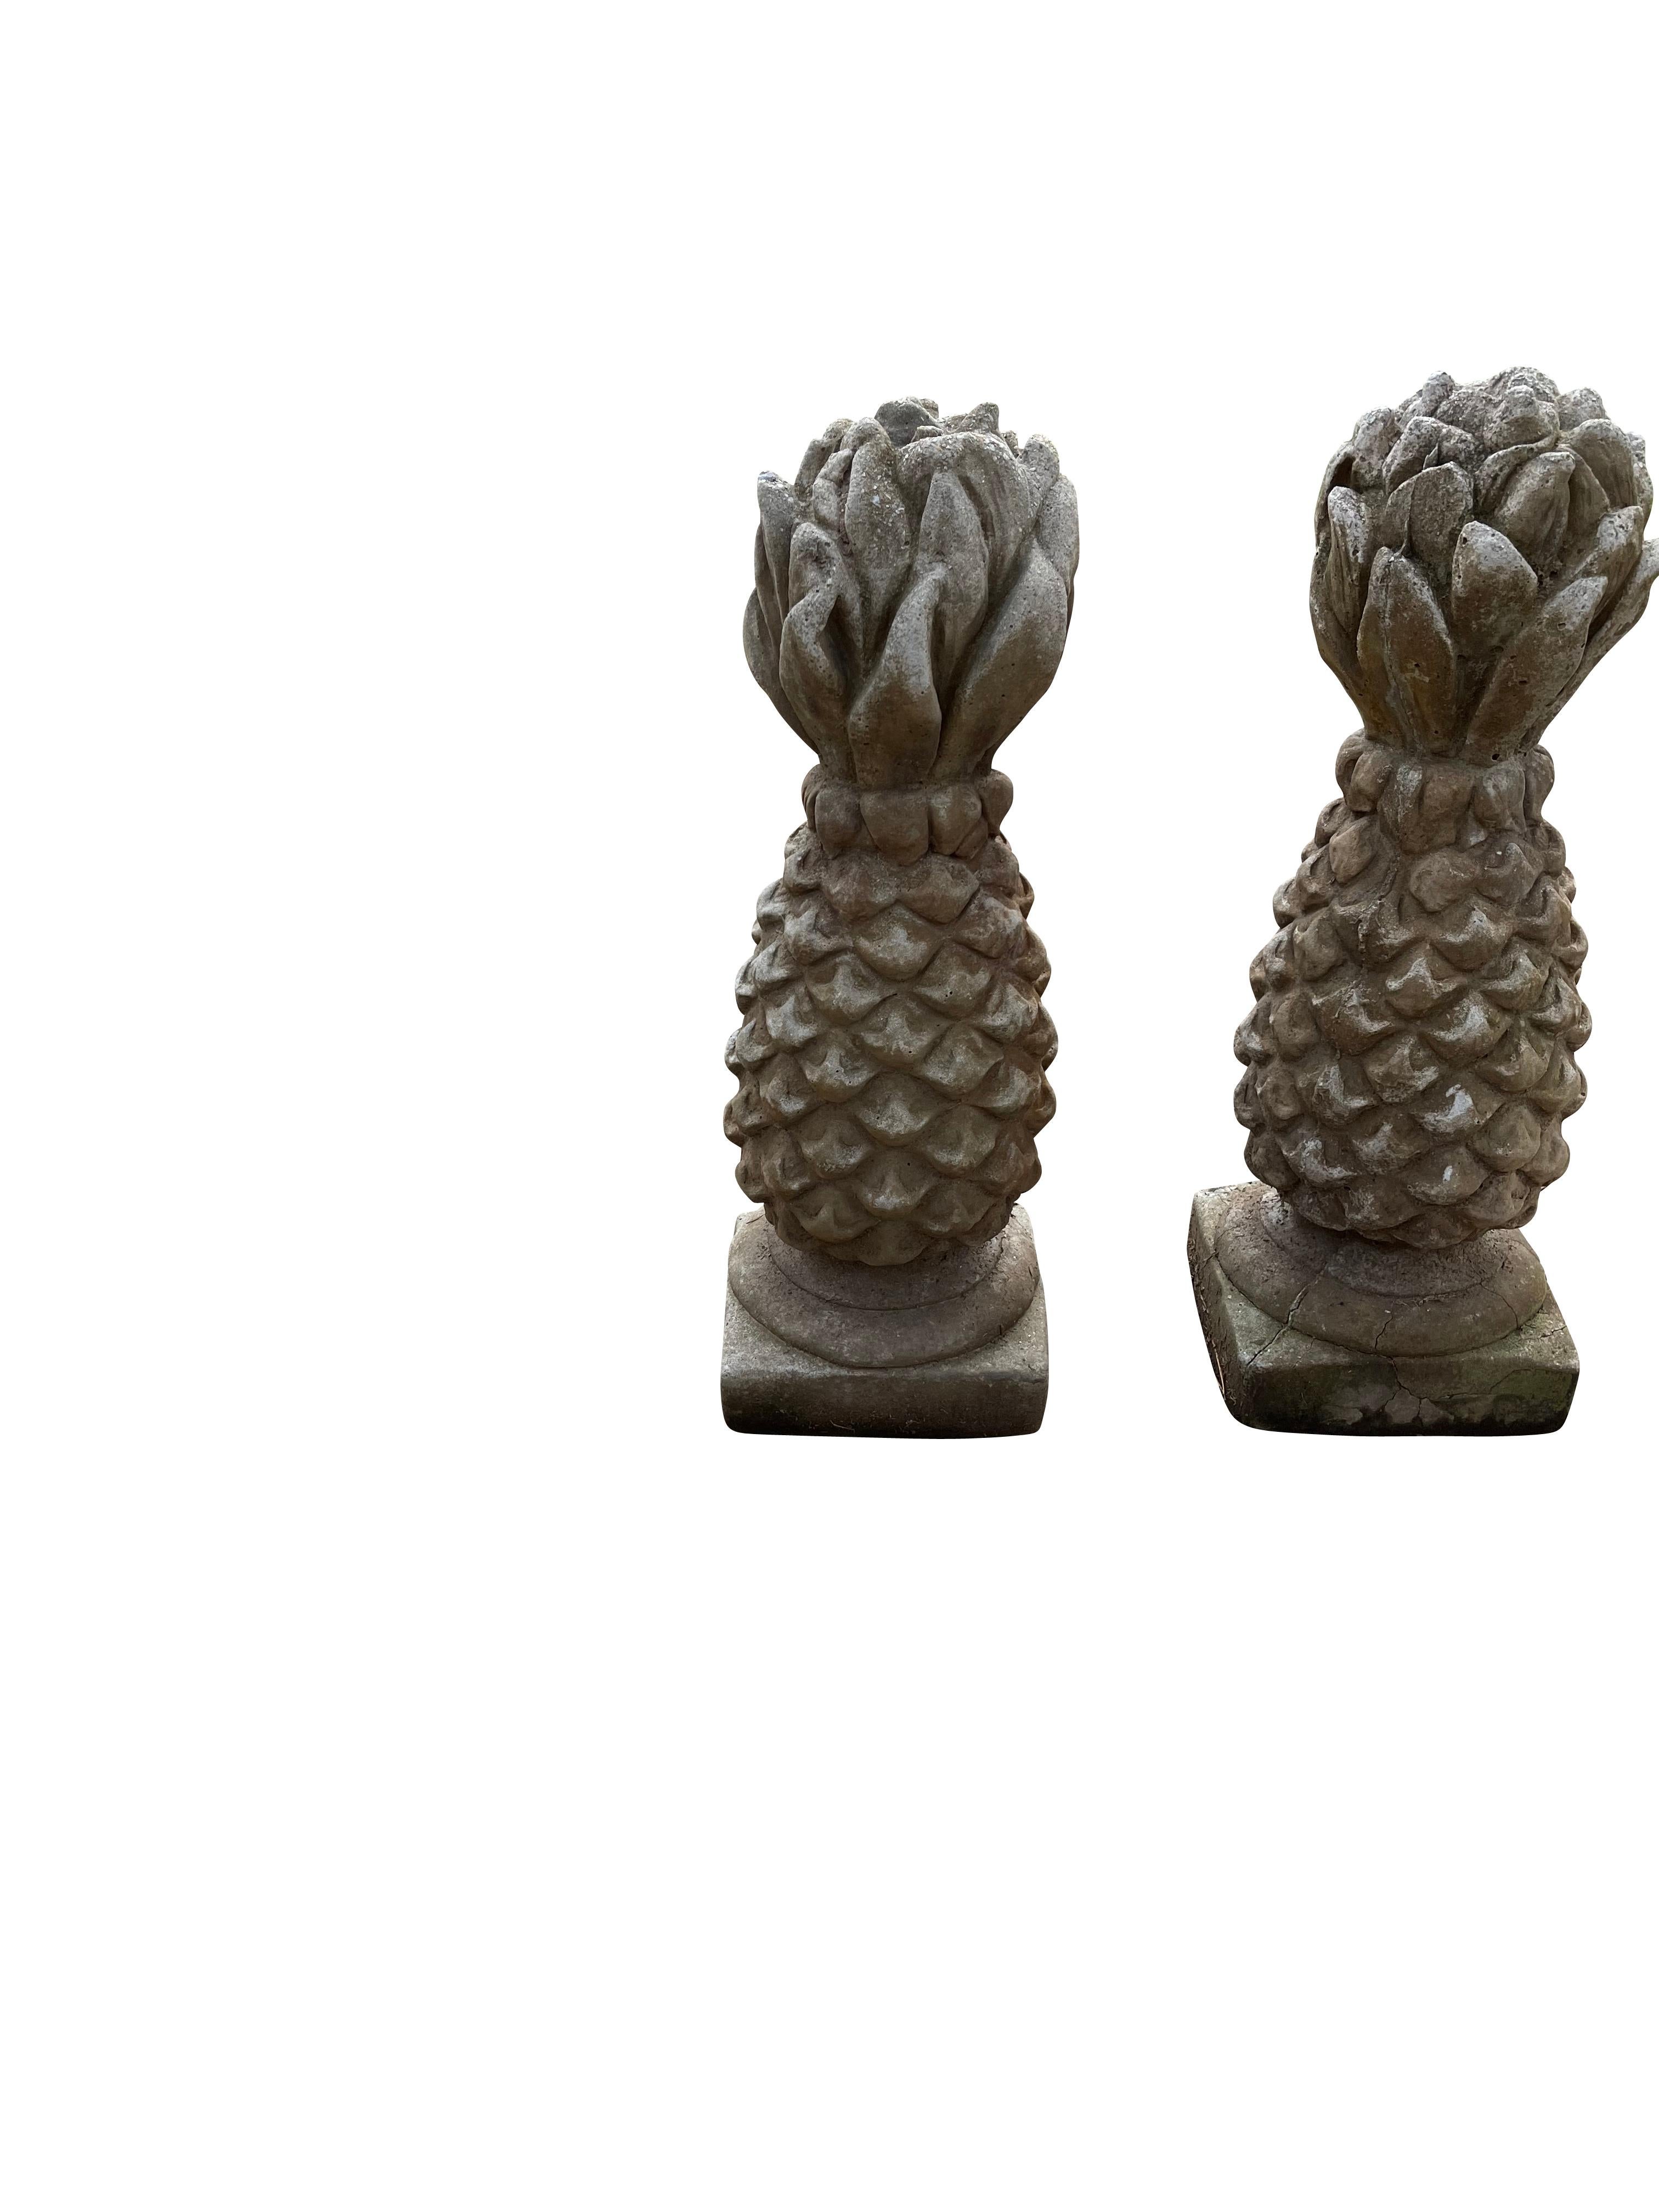 Attractive pair of cement pineapple garden finials. Perfect for a welcoming entryway, in a garden, or doorway.